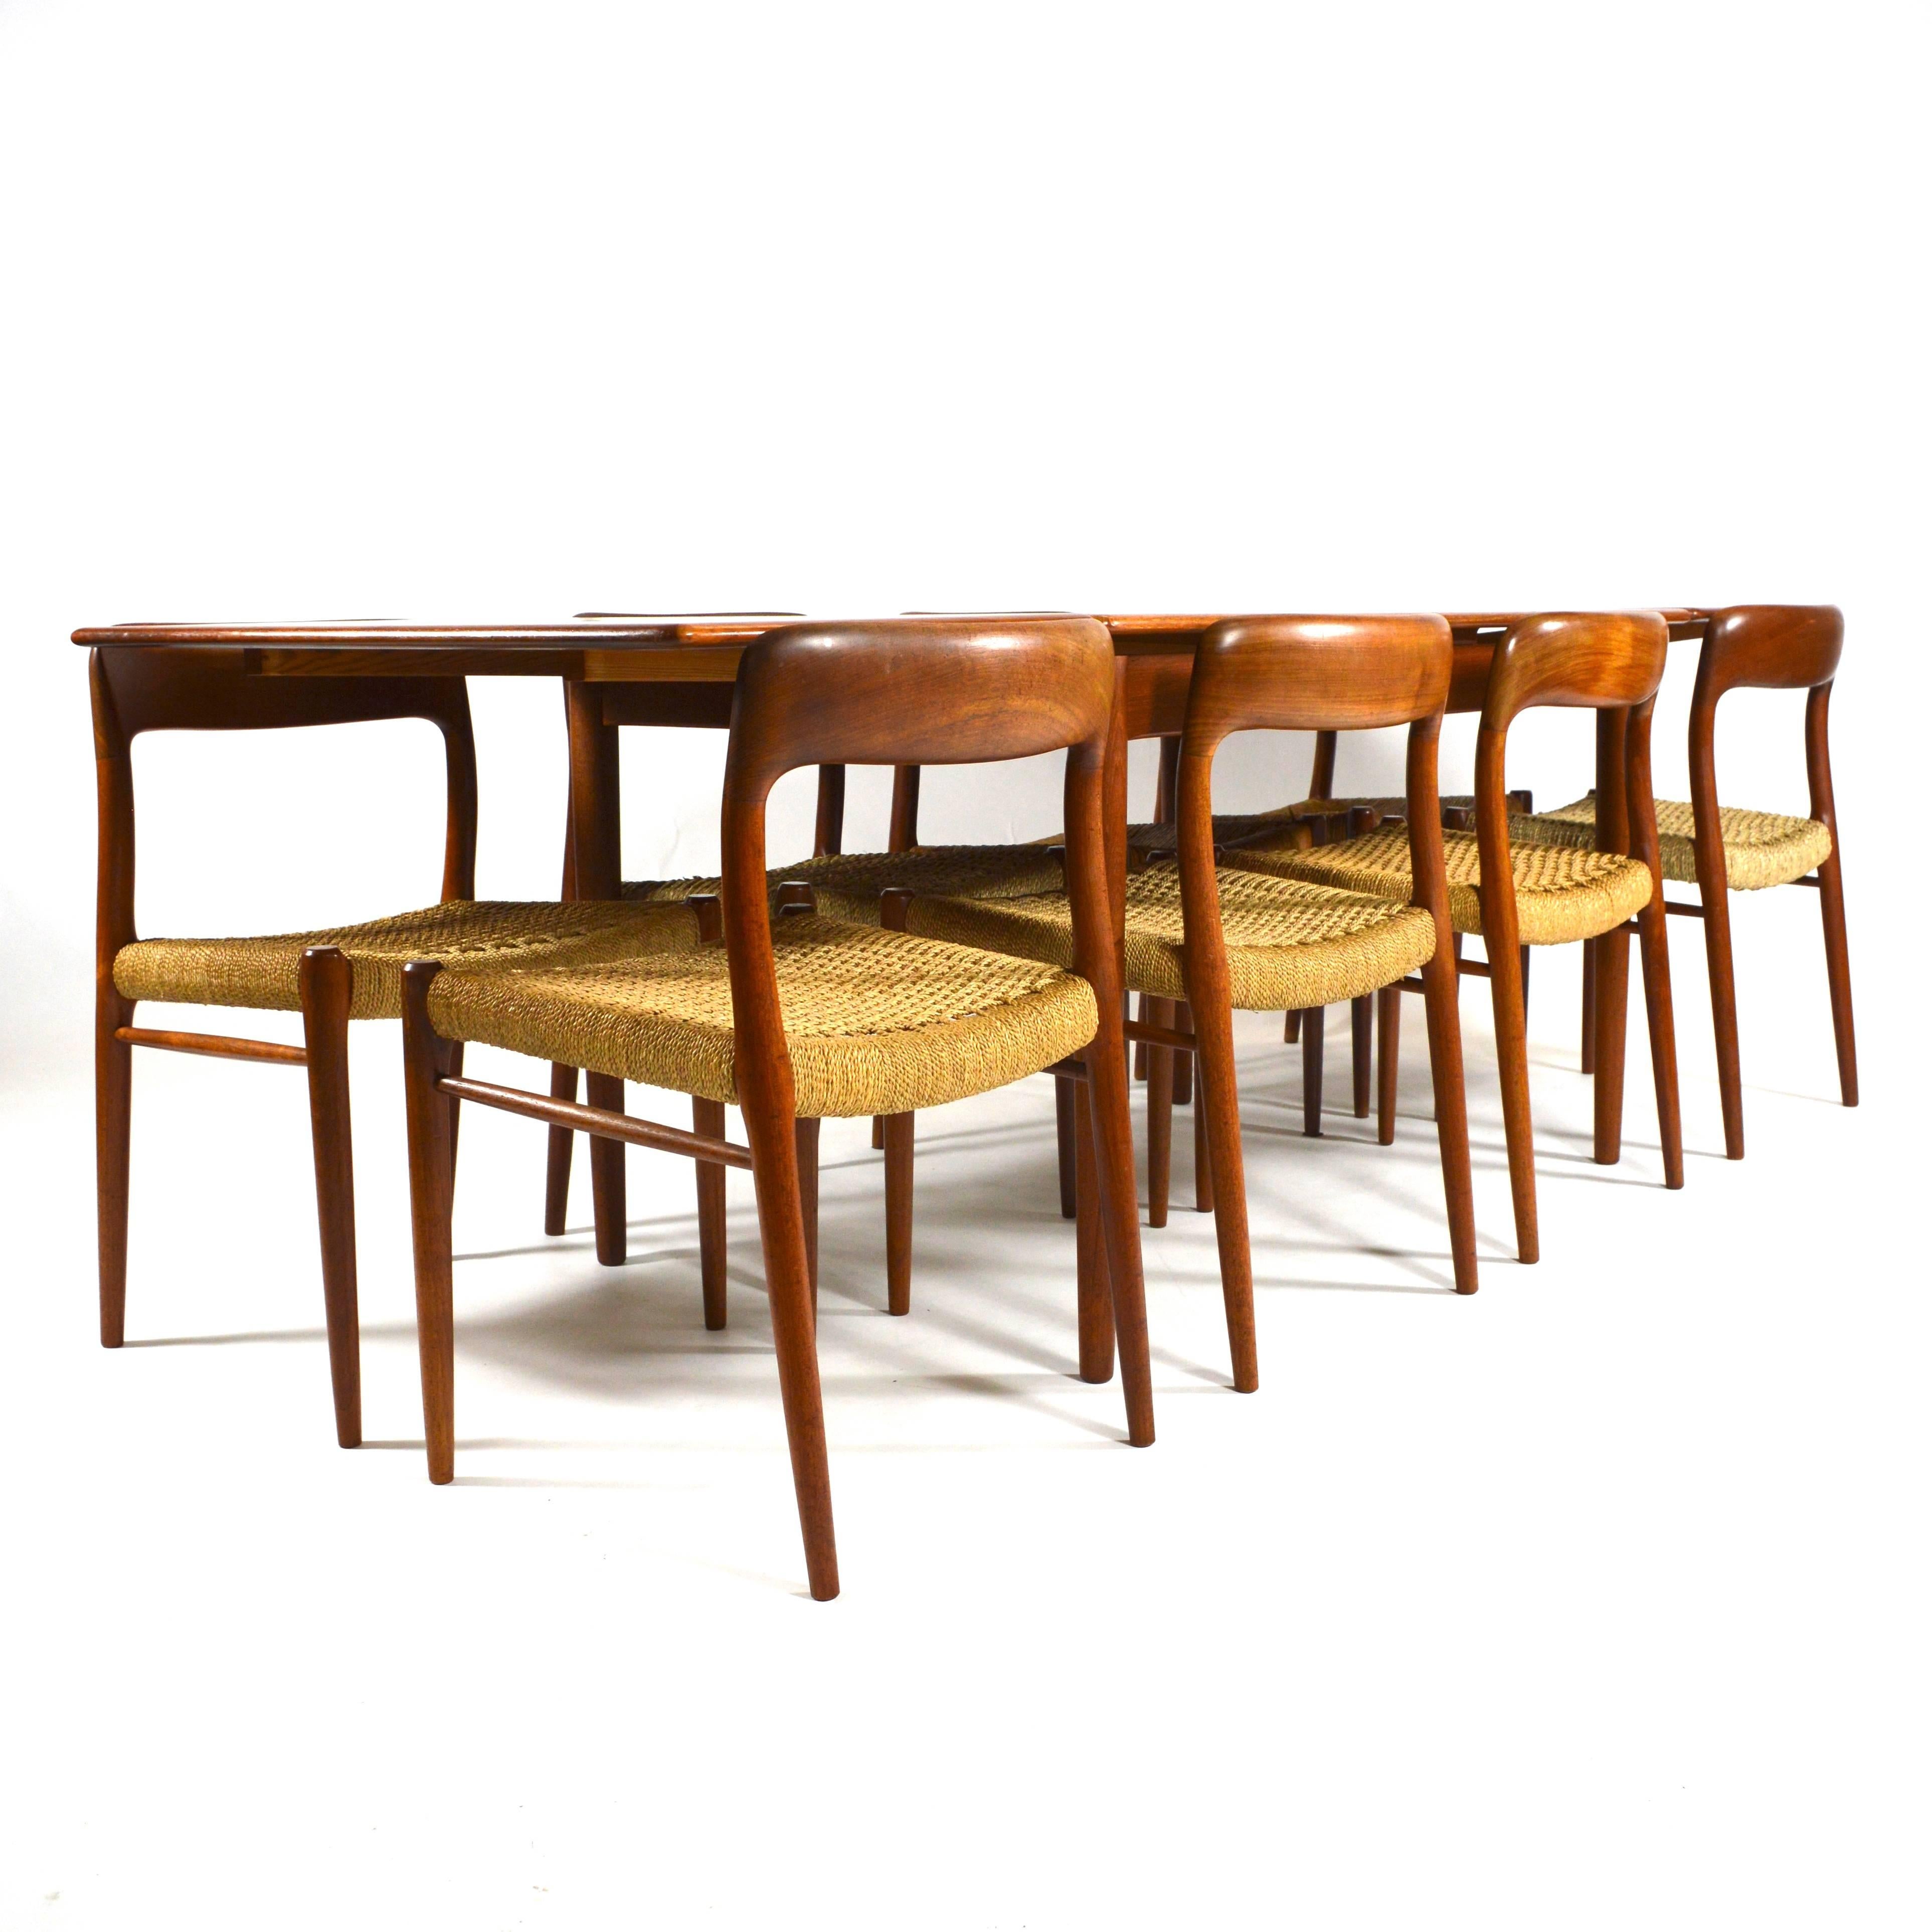 Extendable dining table with eight chairs model 75.
Four of the chairs have been re-upholstered.
The top of the table has been professionally restored.
This set is also available with six chairs.
Manufactured by the J.L. Moller Møbelfabrik in